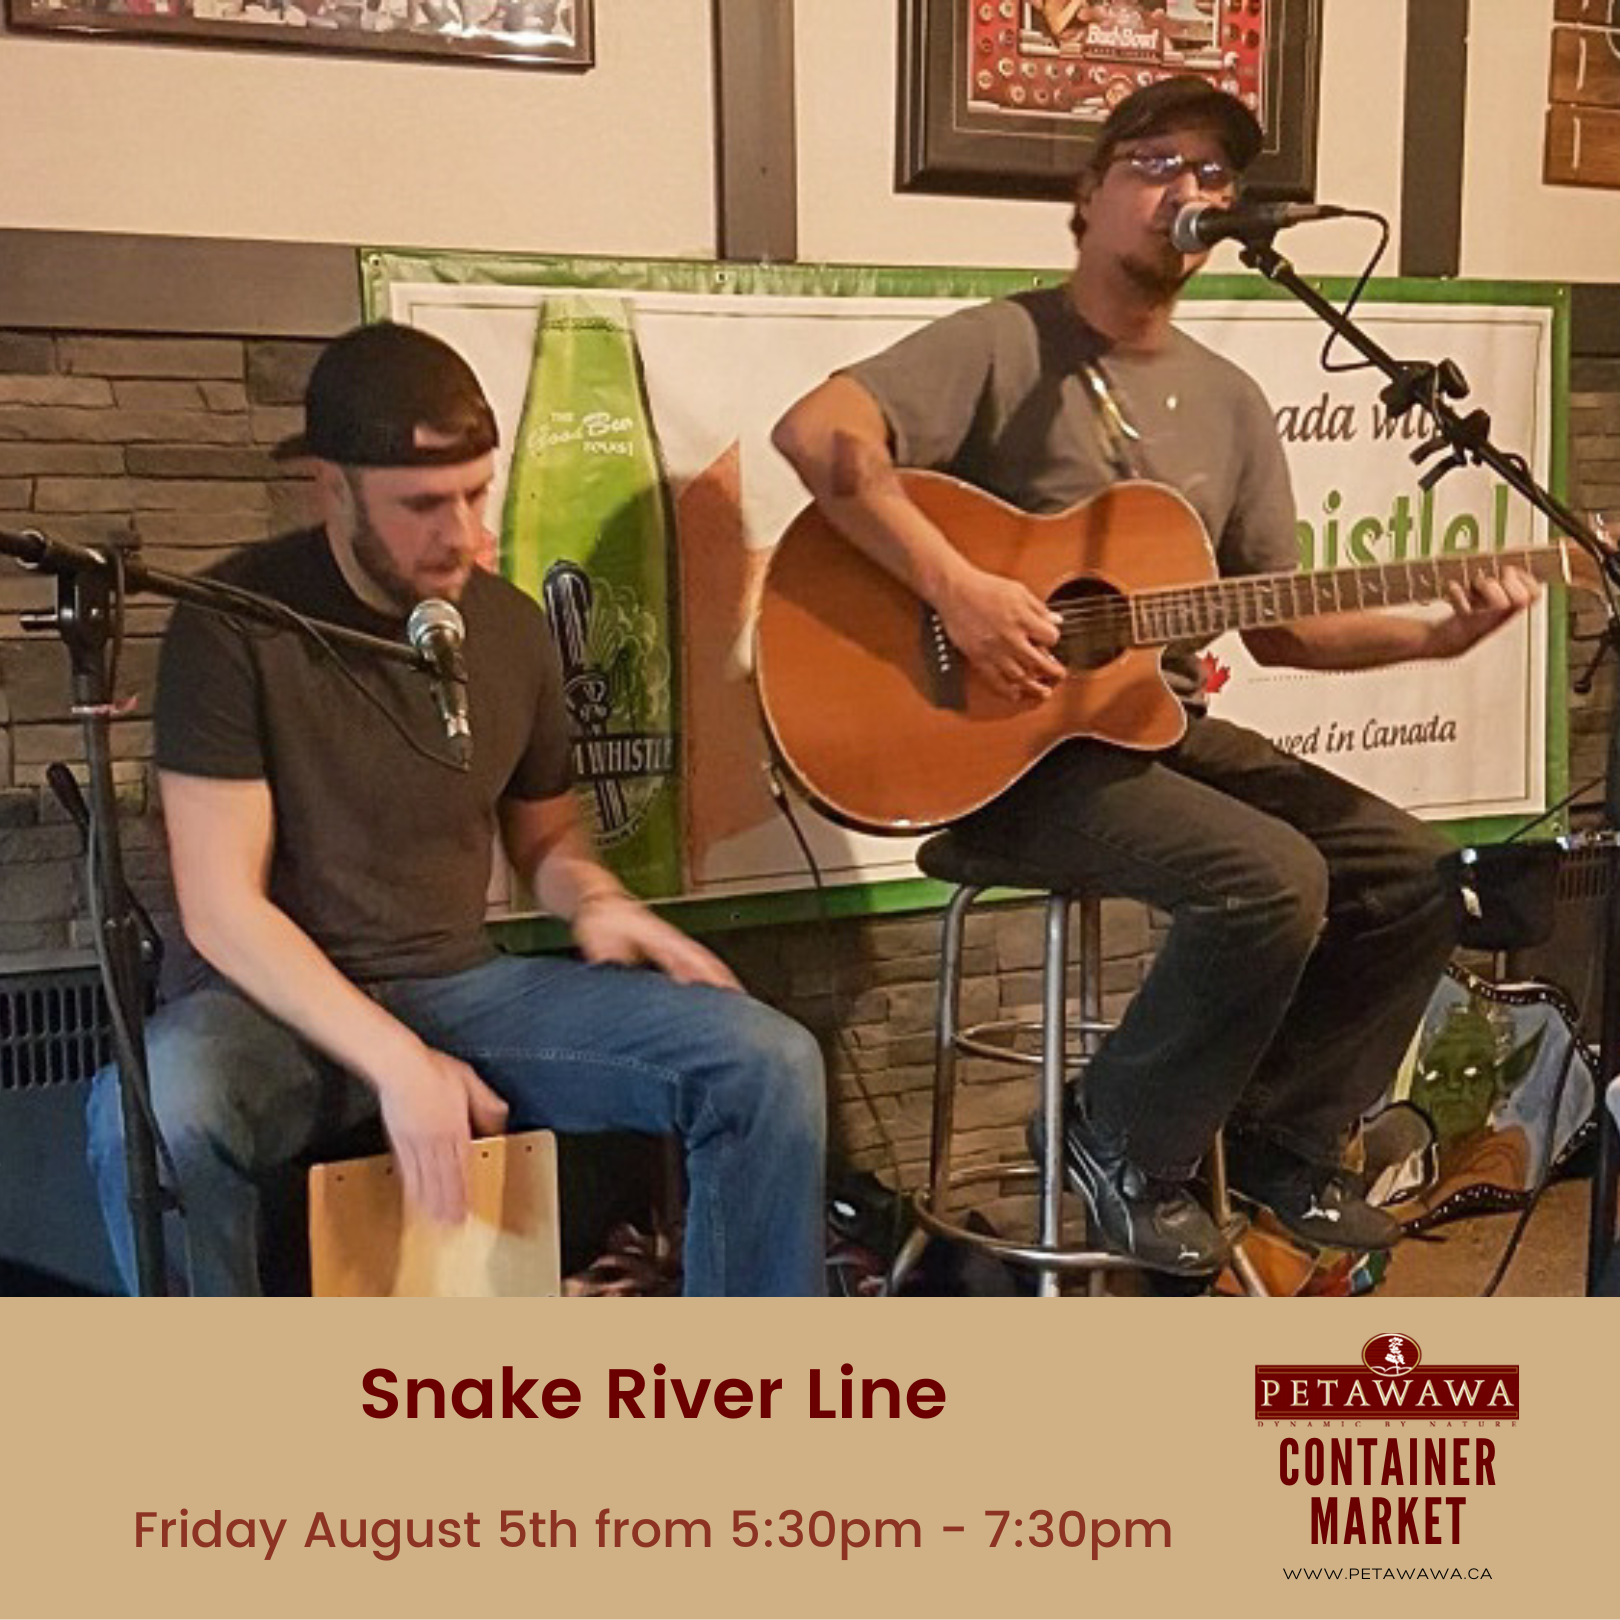 a poster of Snake River Line musicians